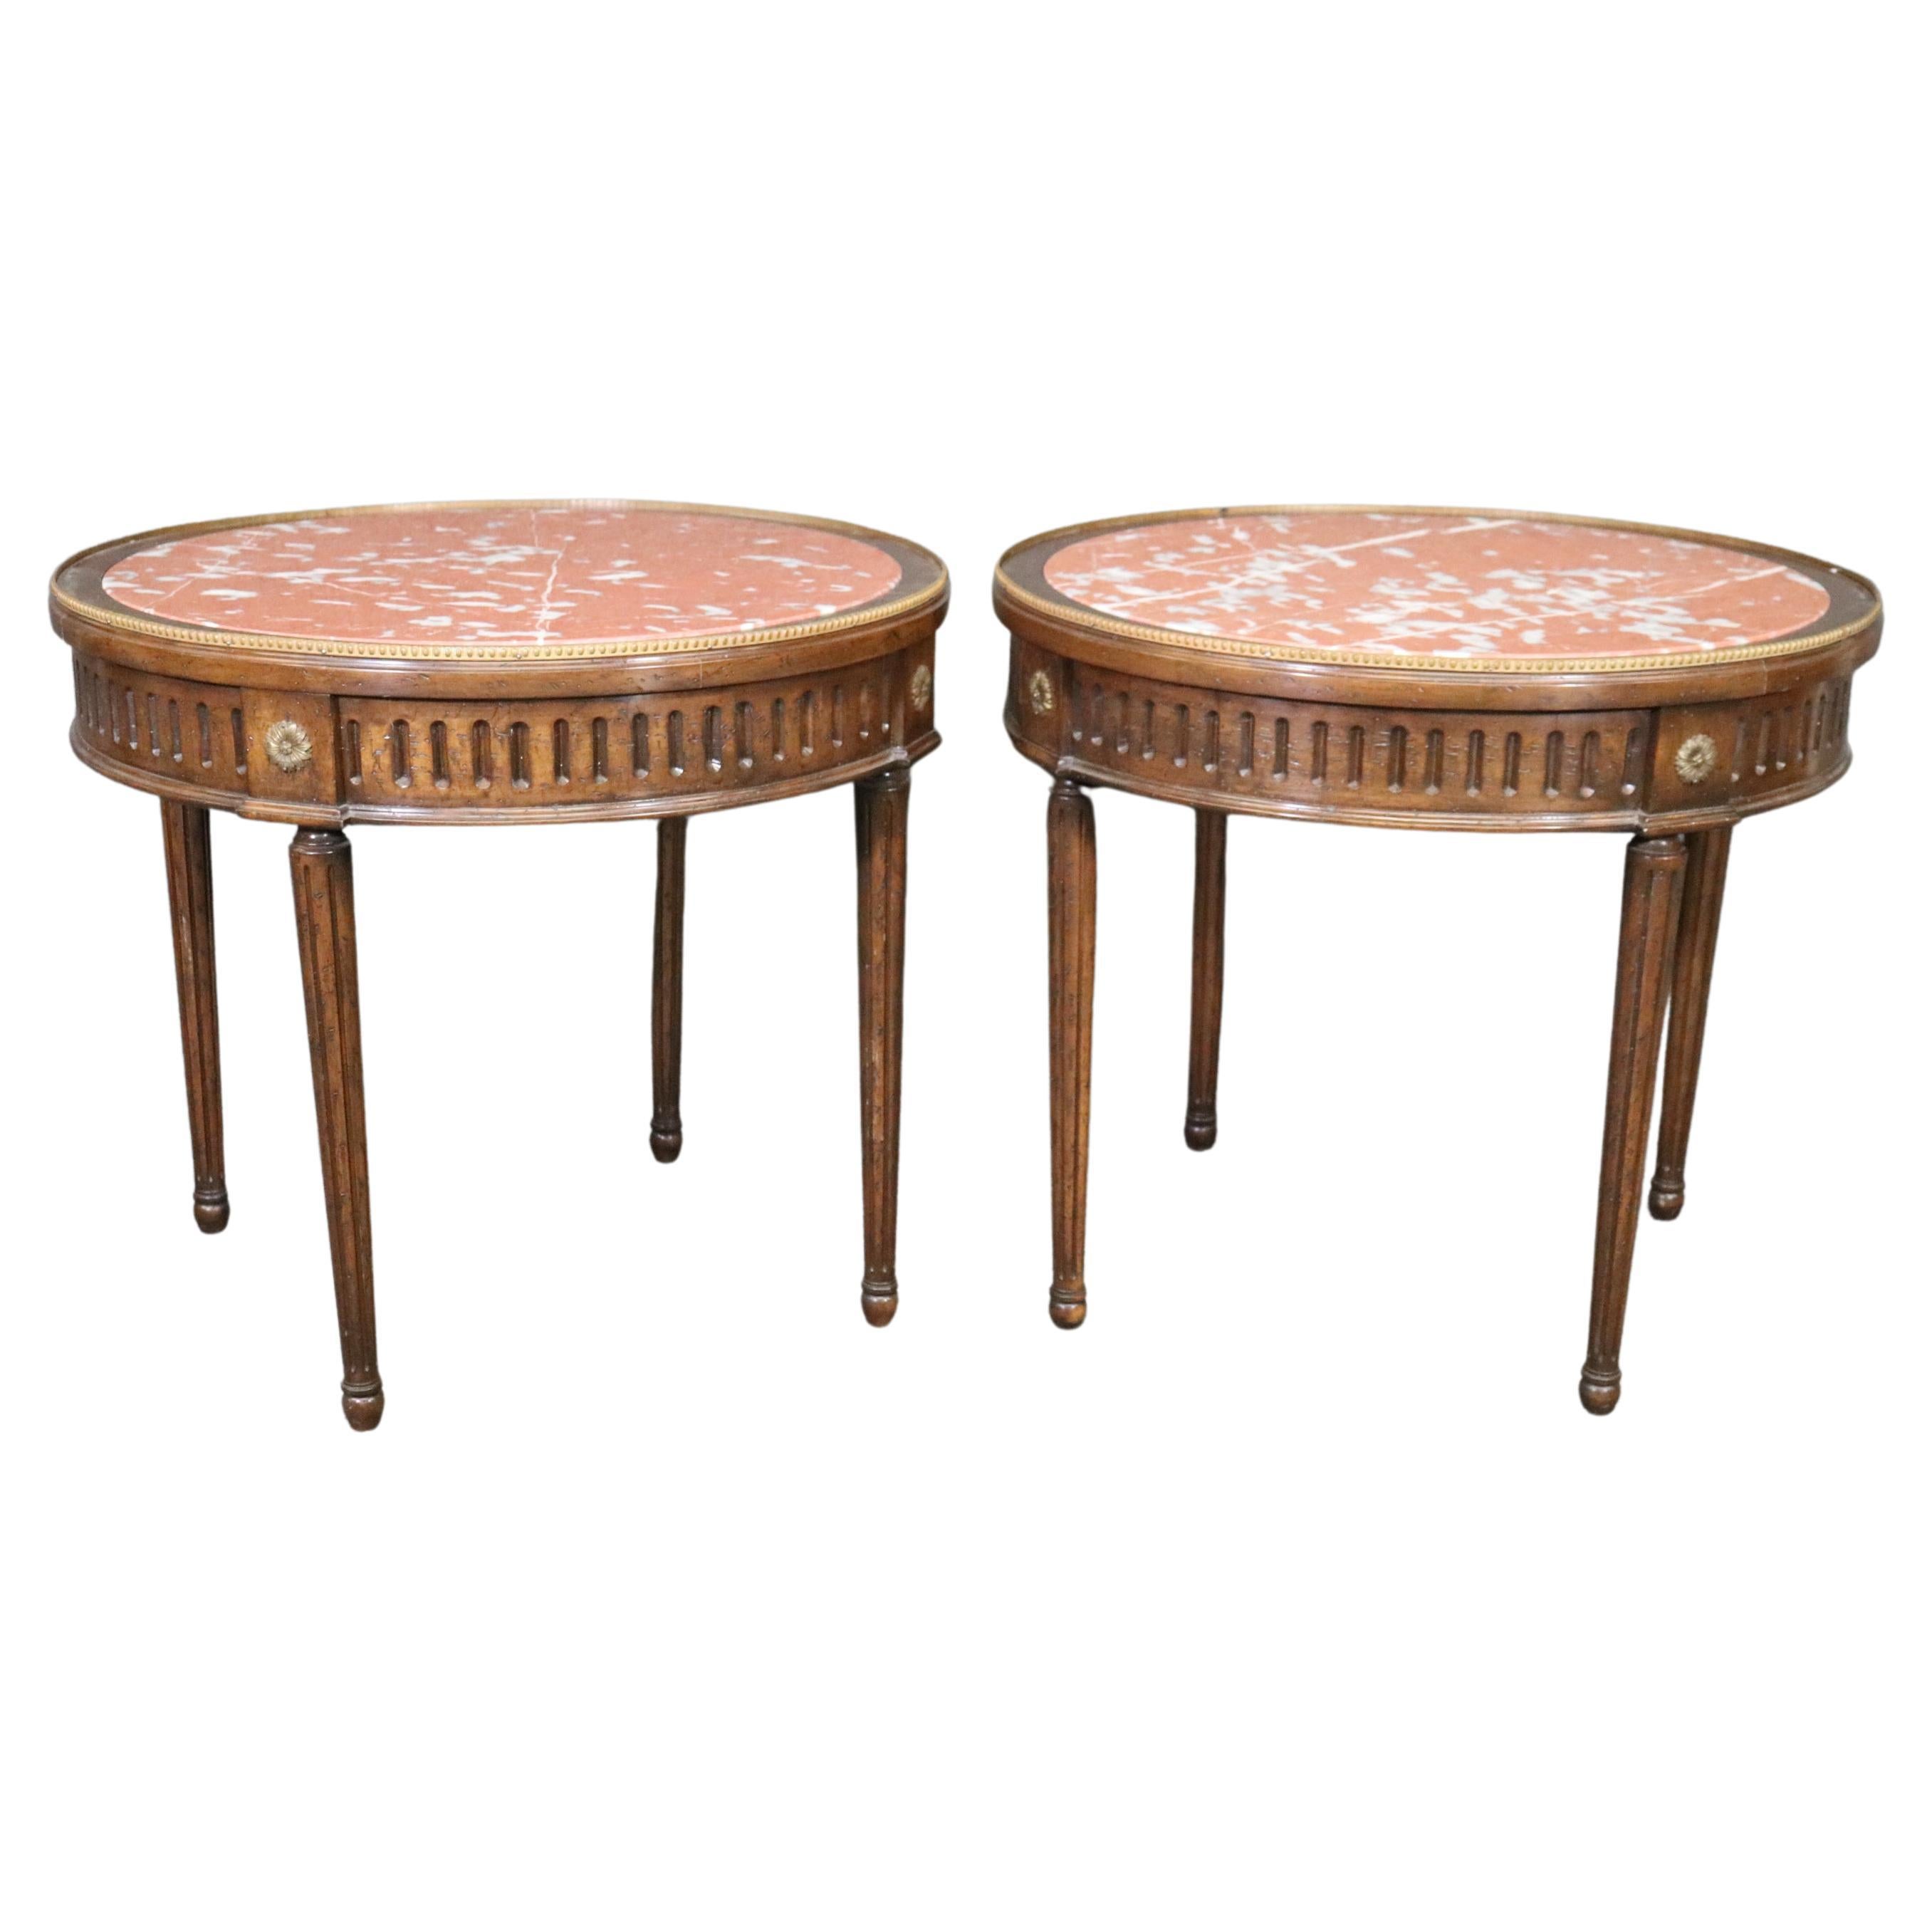 Fantastic Pair of French Marble Top Bouillotte Tables with Brass Trim circa 1940 For Sale